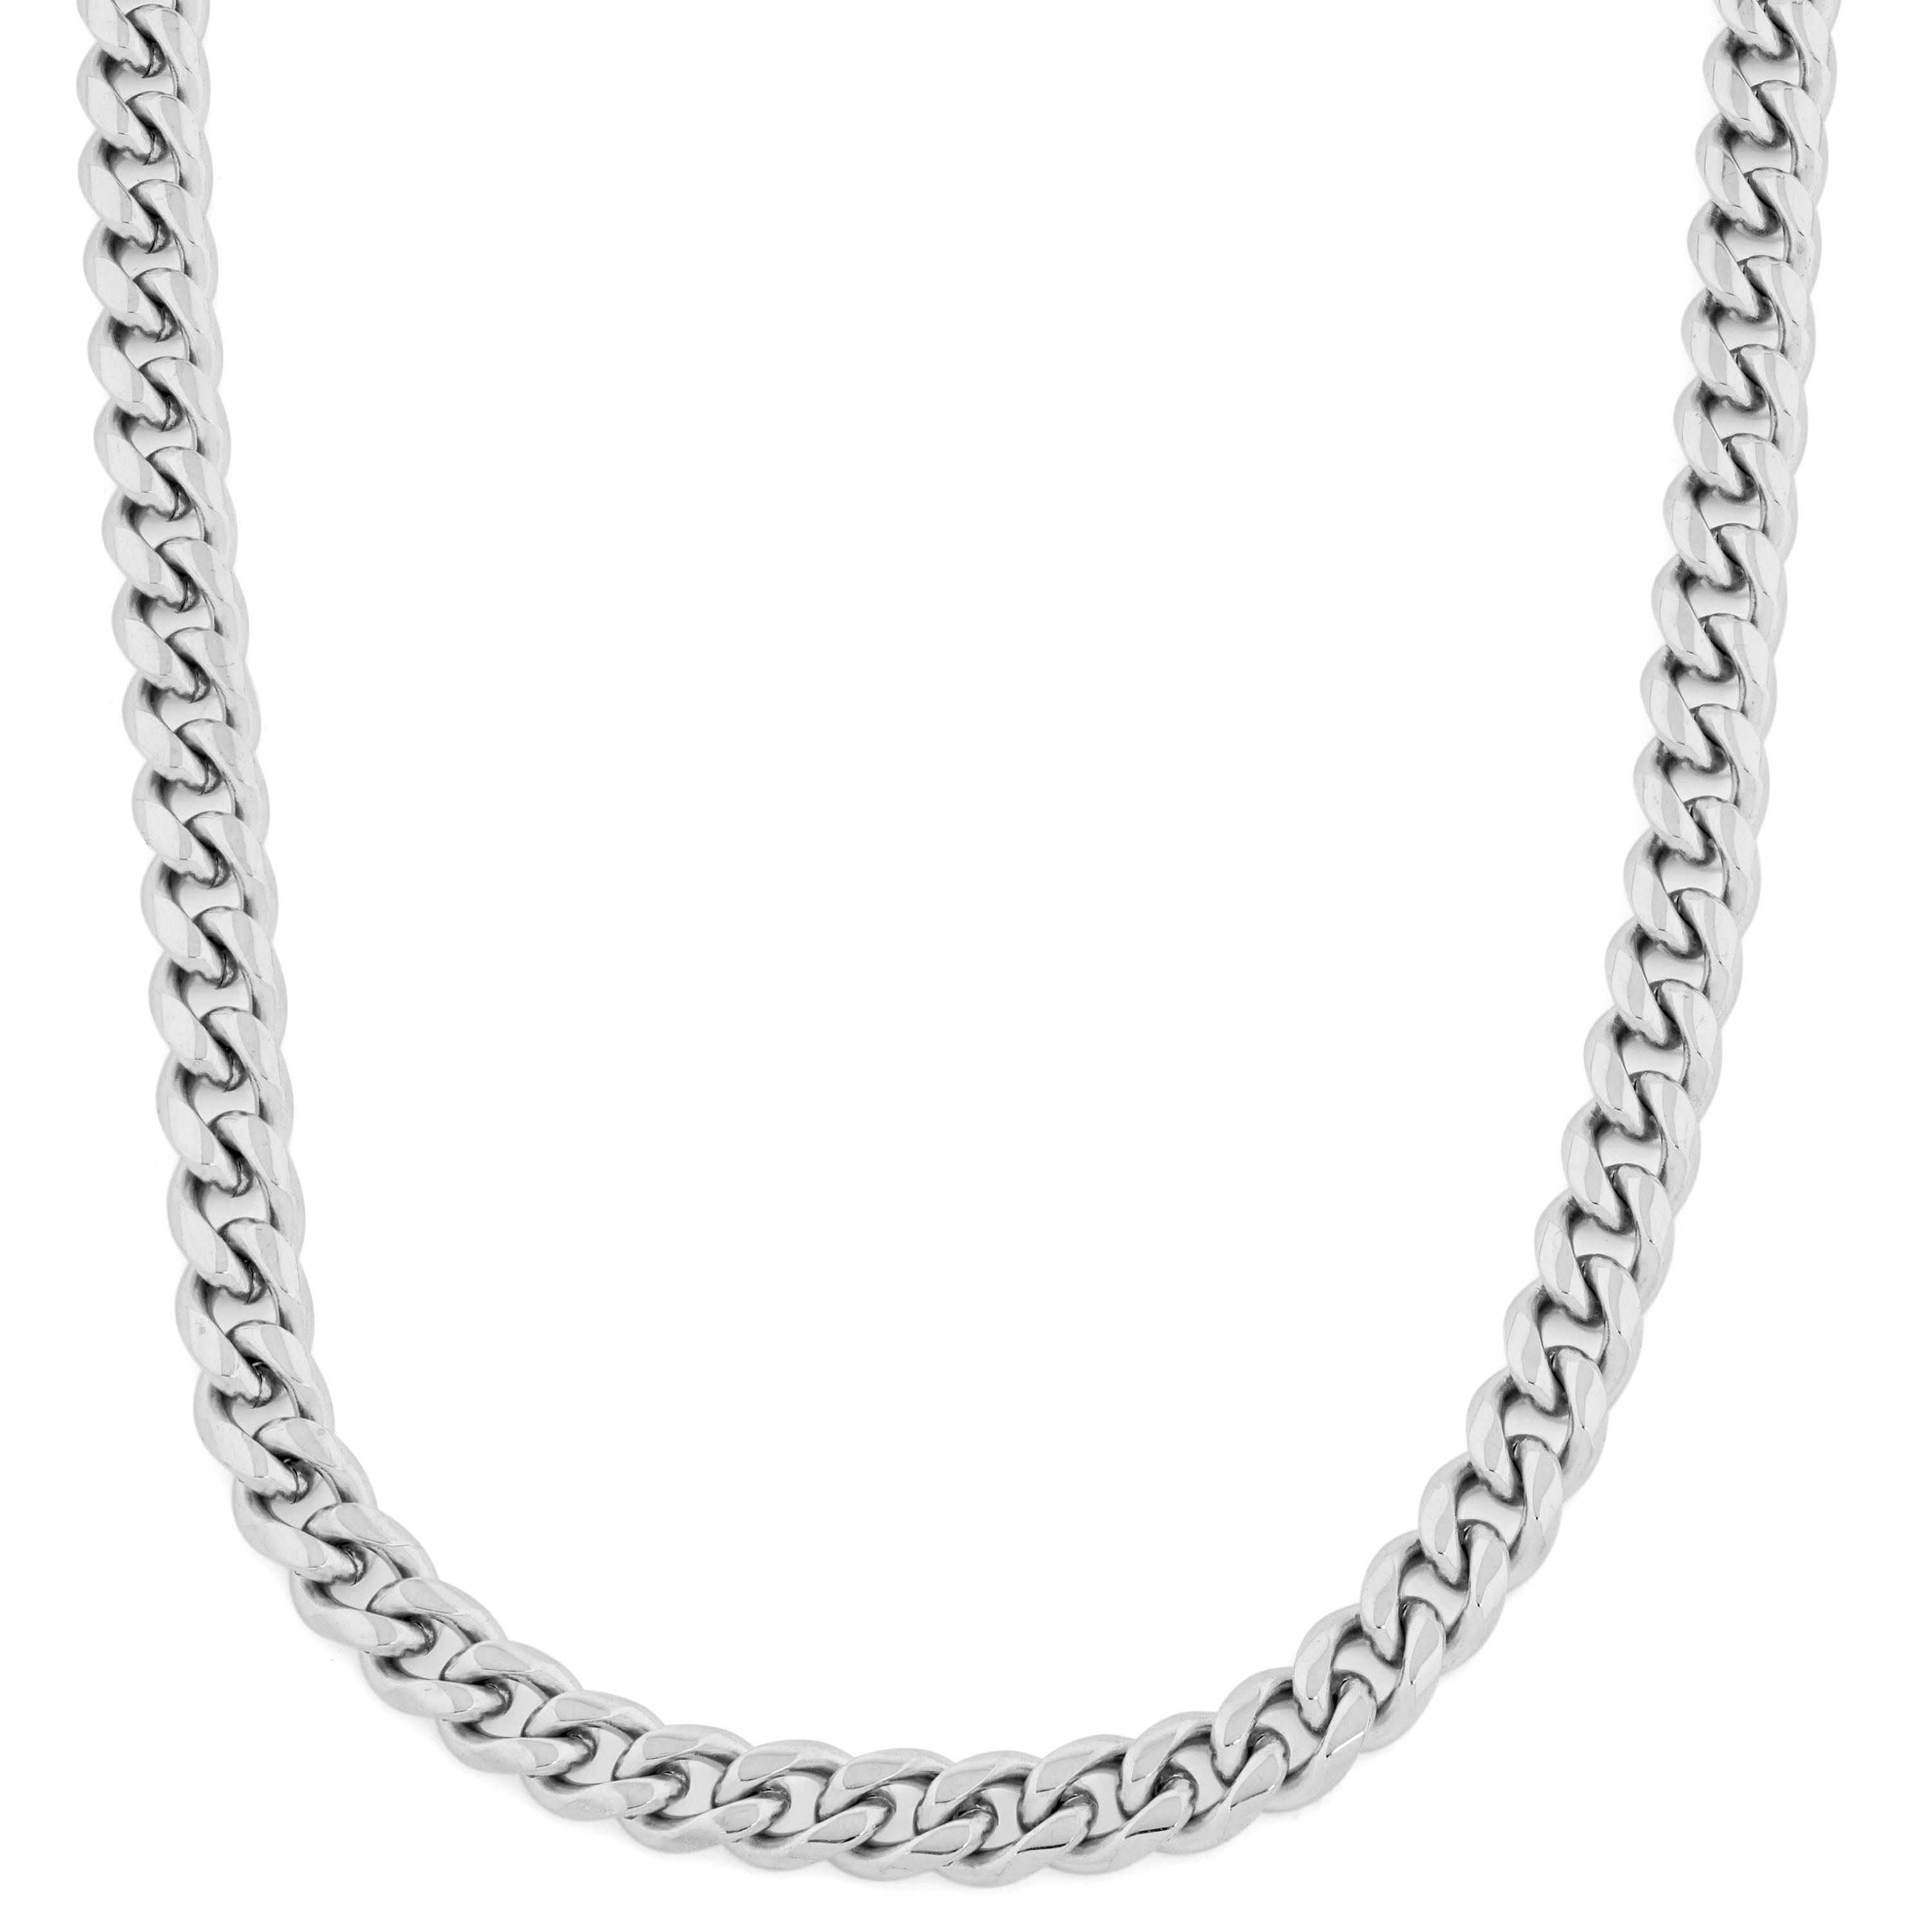 8 mm Silver-Tone Stainless Steel Cuban Chain Necklace